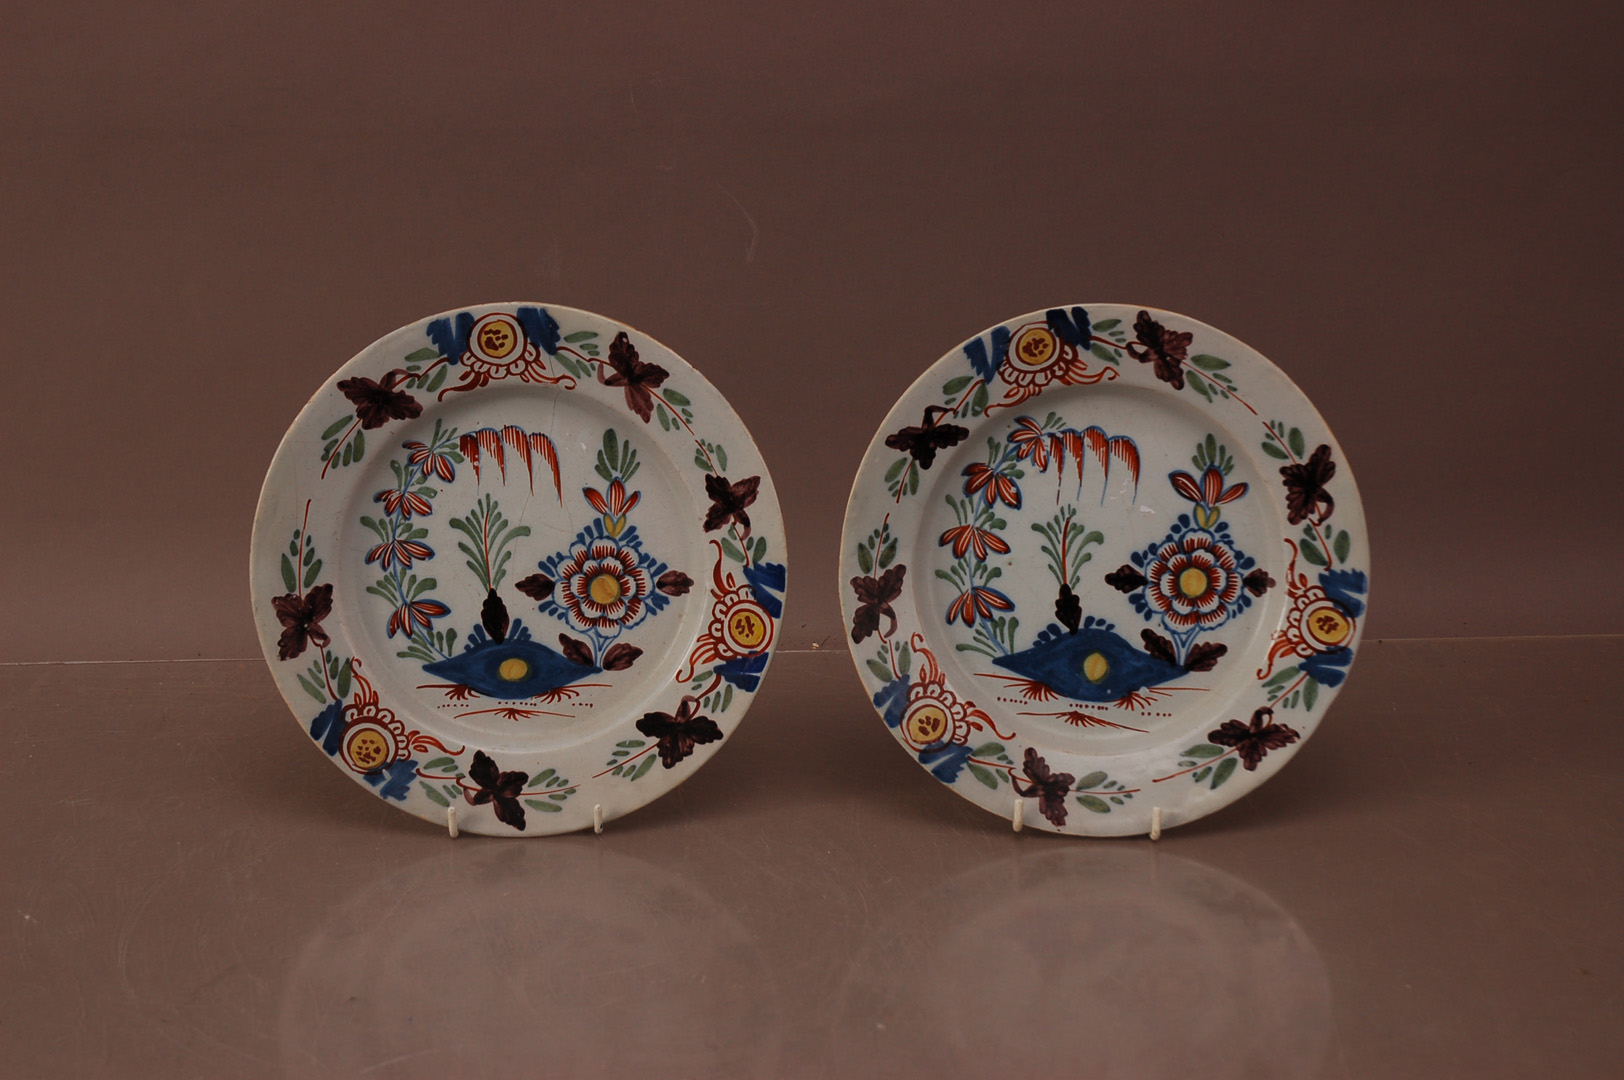 A pair of early 19th Bristol Delft fazakerley plates, with hand painted floral decoration 22.5cm